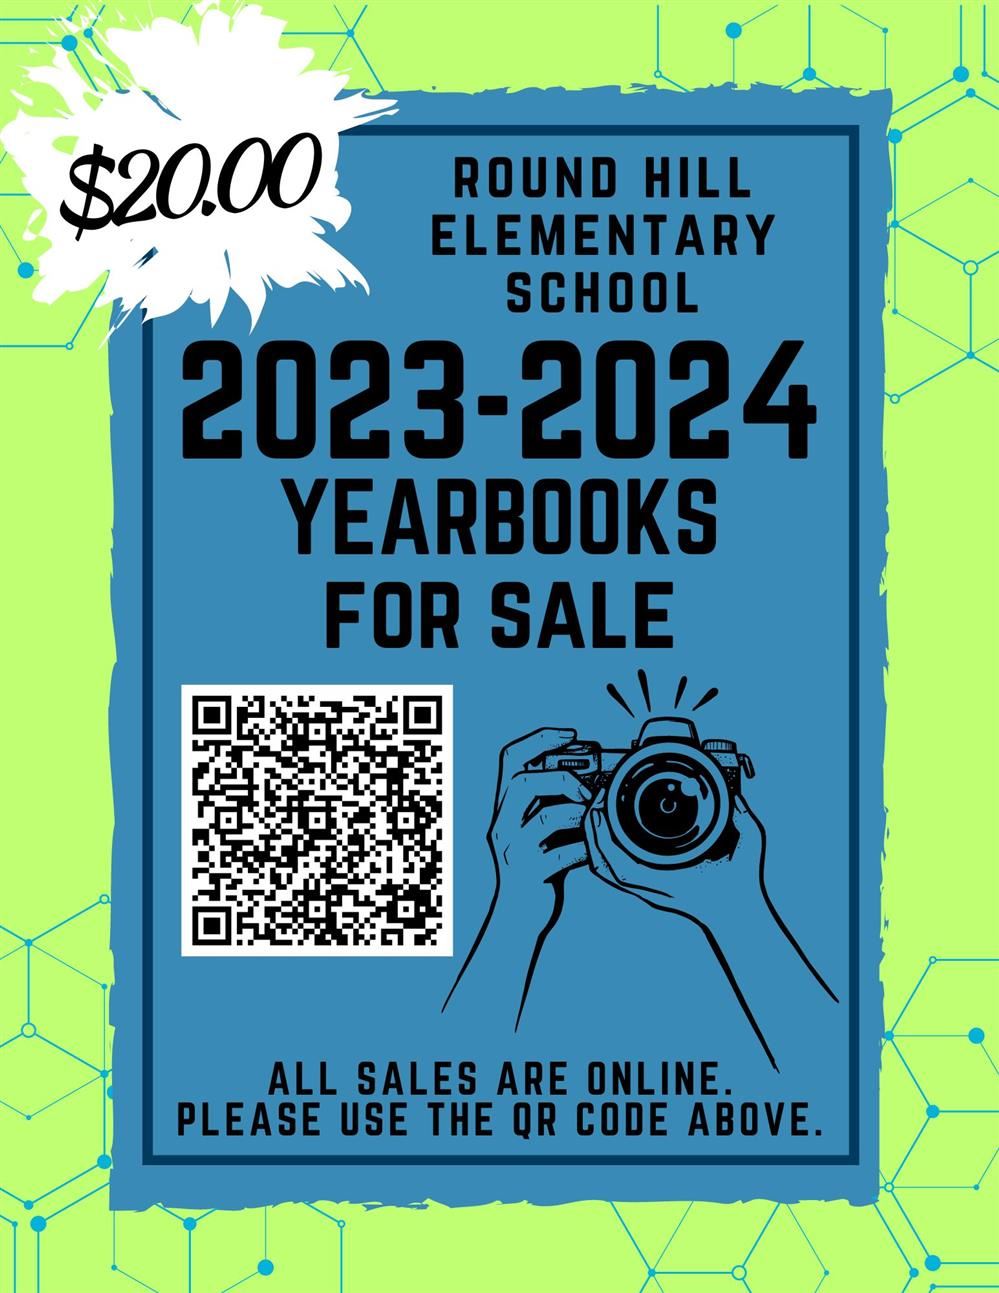 Round Hill 2023-2024 yearbooks for sale $20. All sales are online. Please use the QR code.